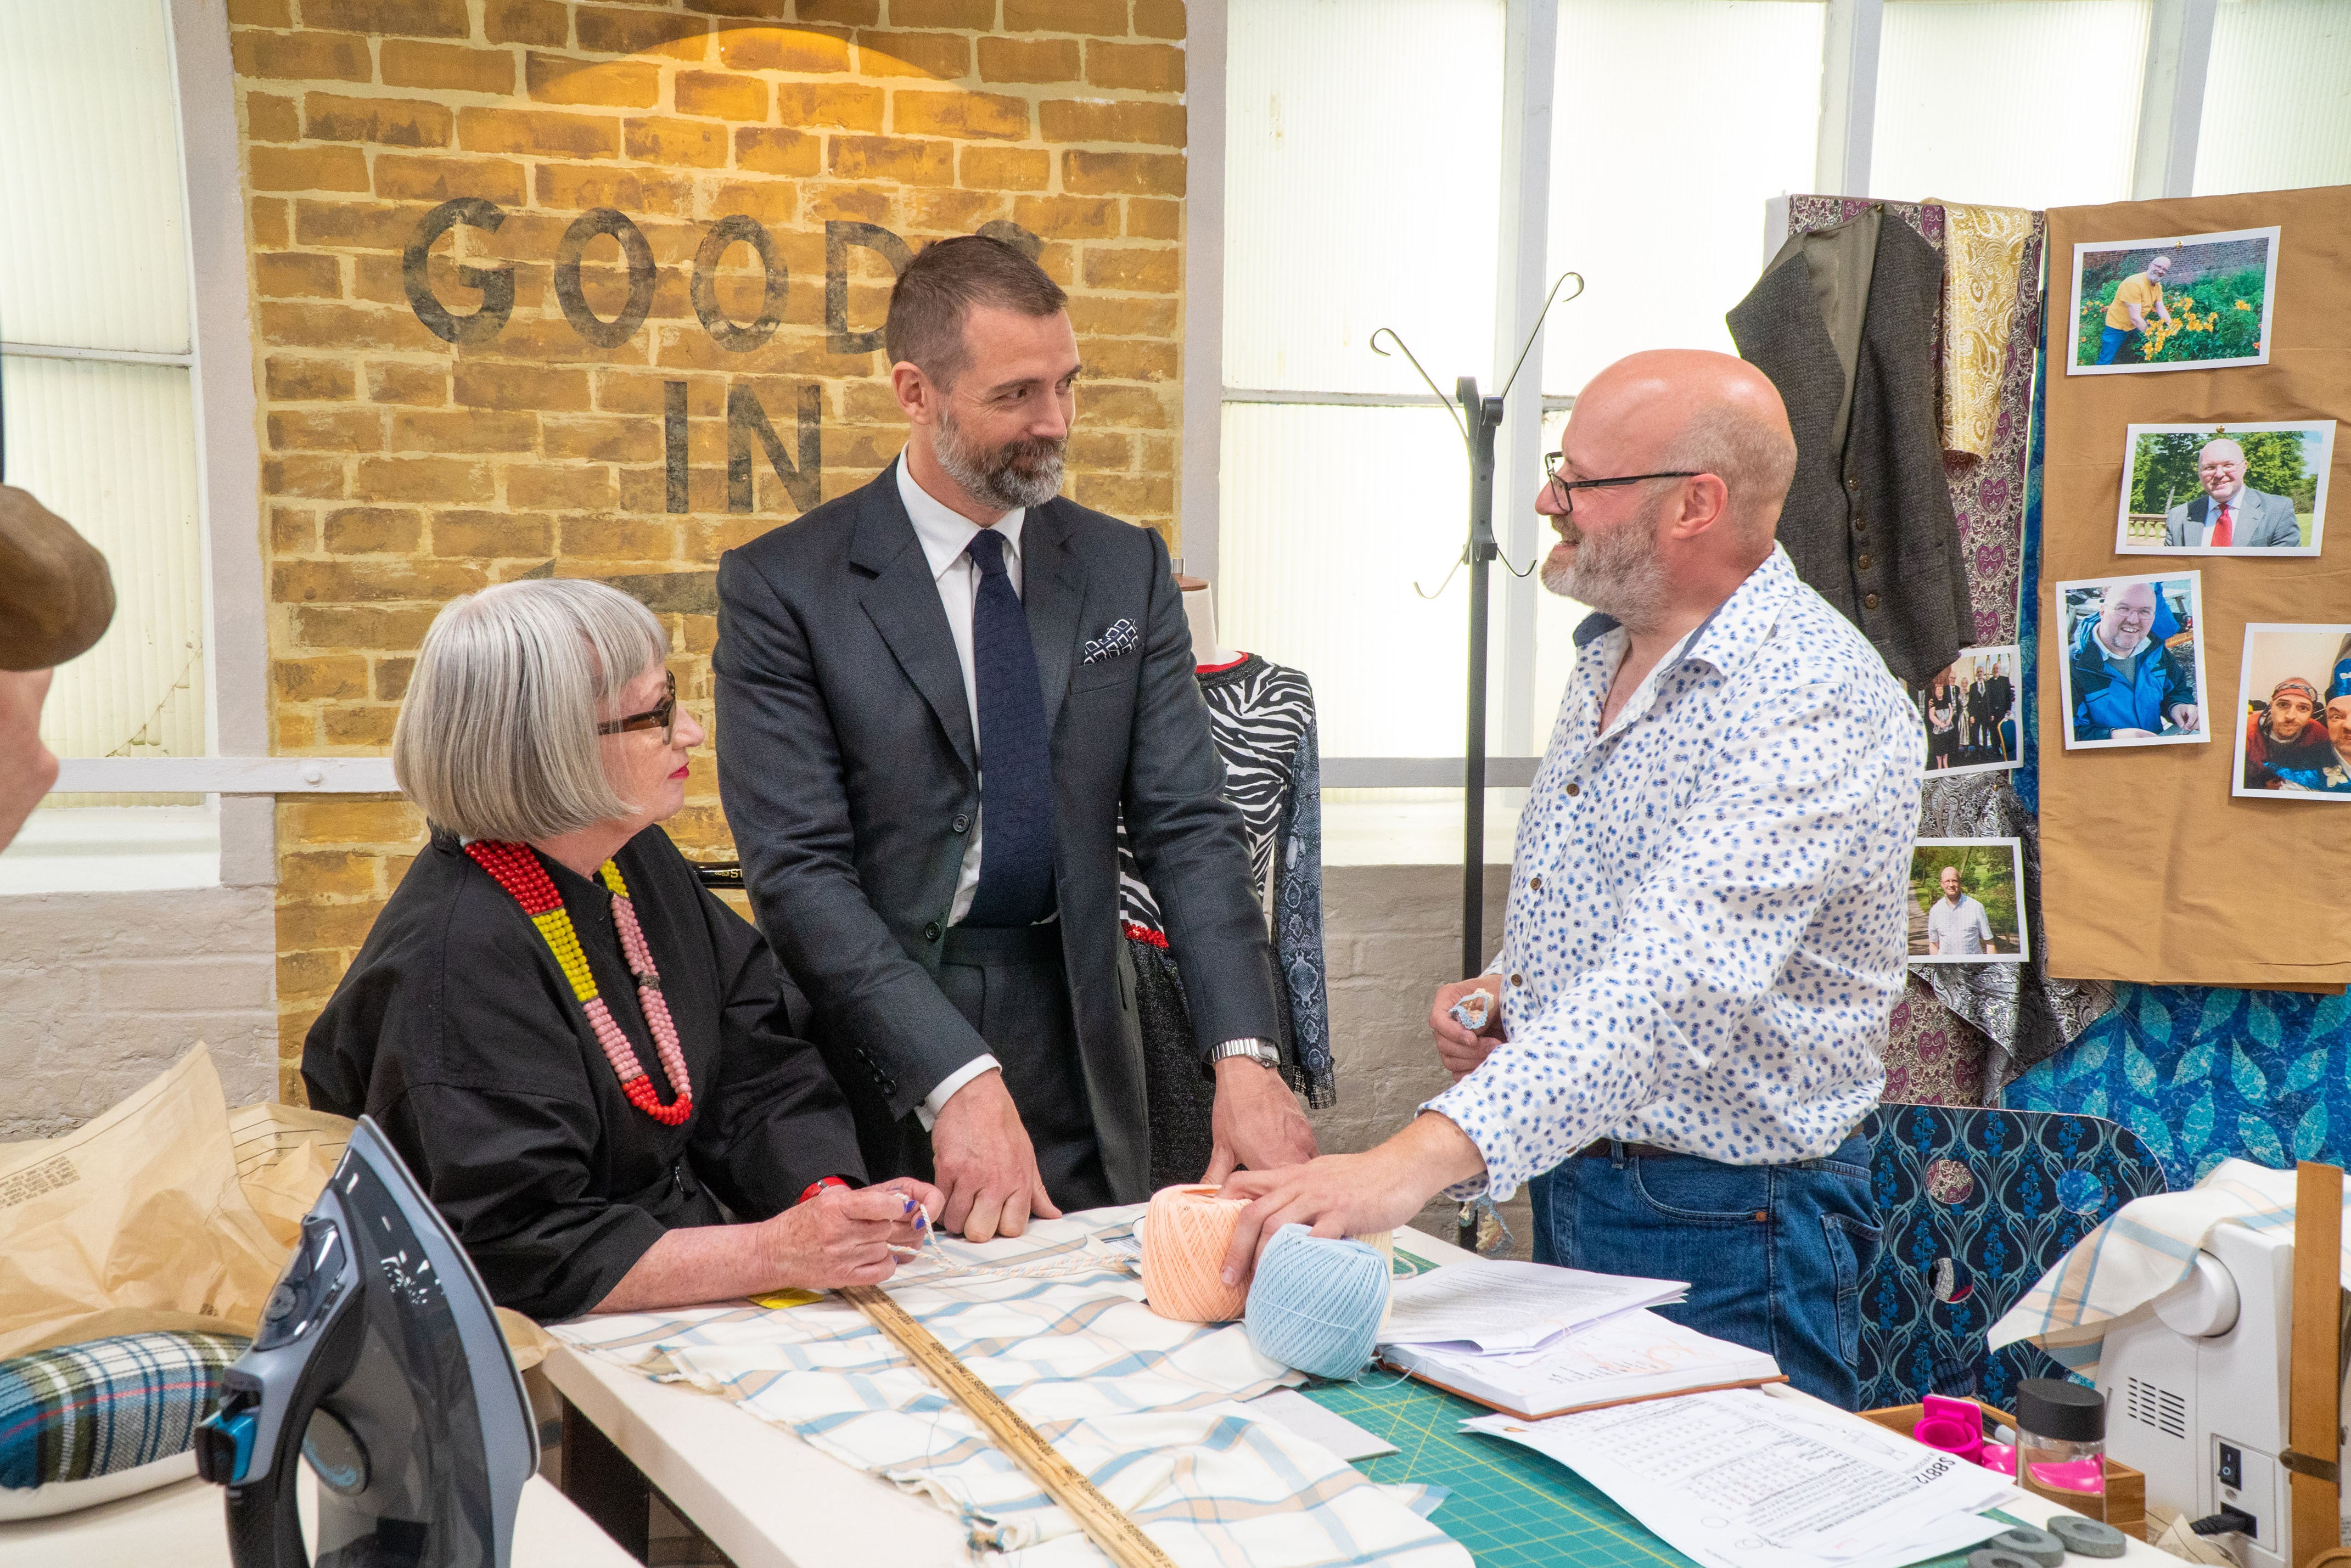 Judges Patrick Grant, centre, and Esme Young talk to a Sewing Bee hopeful